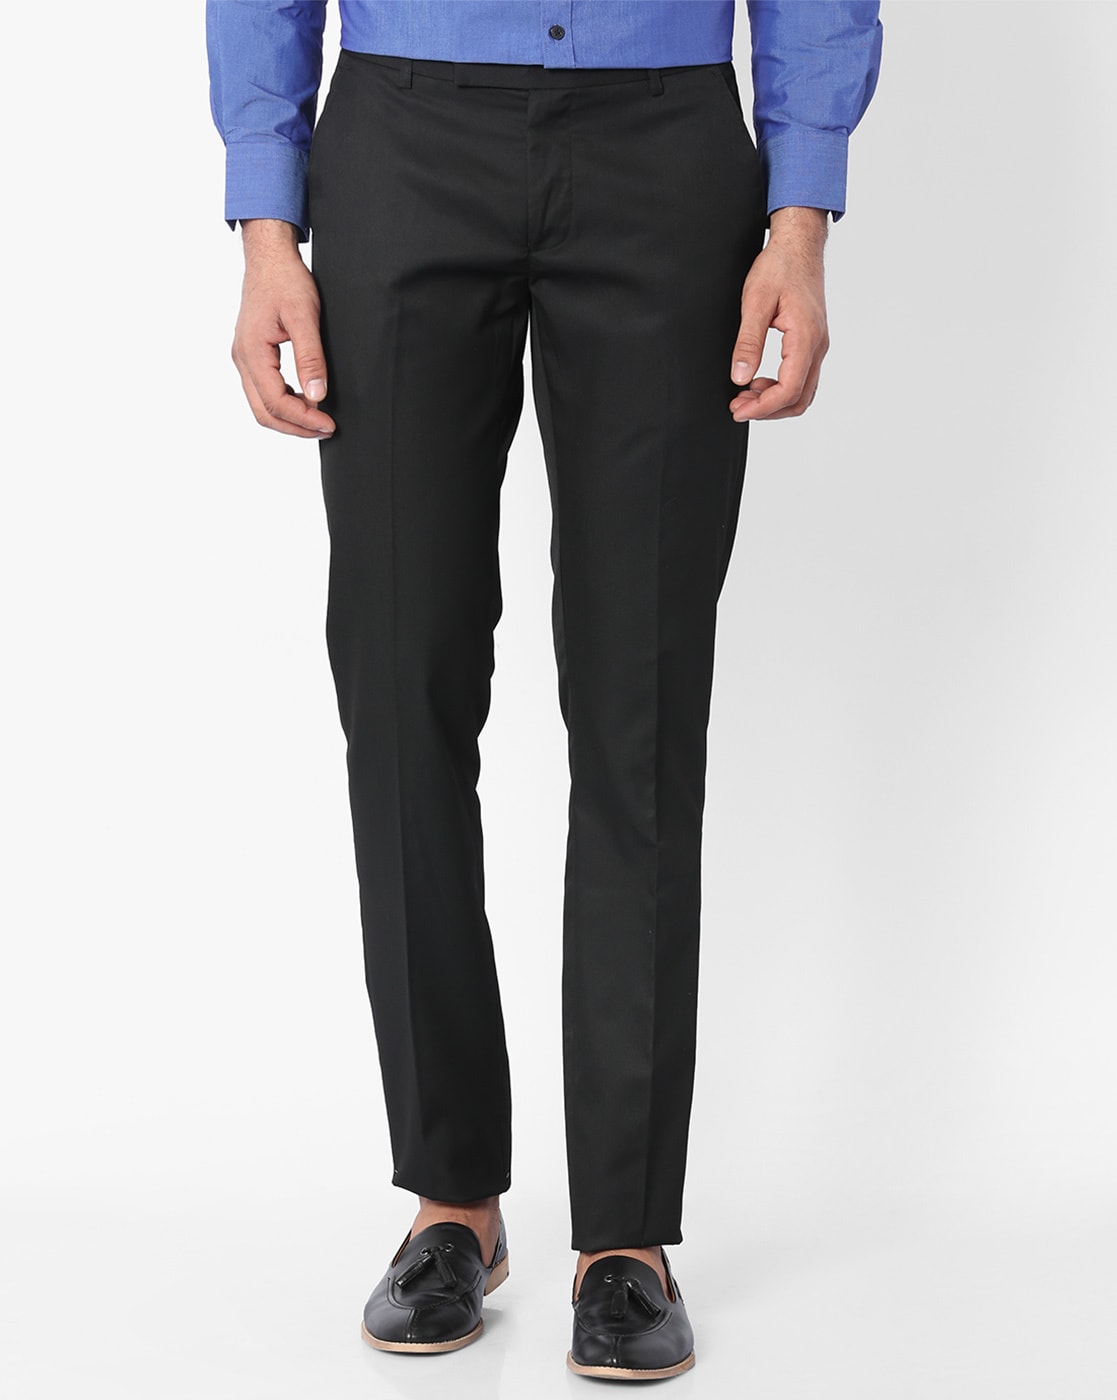 Trends Lifestyle Slim Fit Men Formal Trousers for a classic look